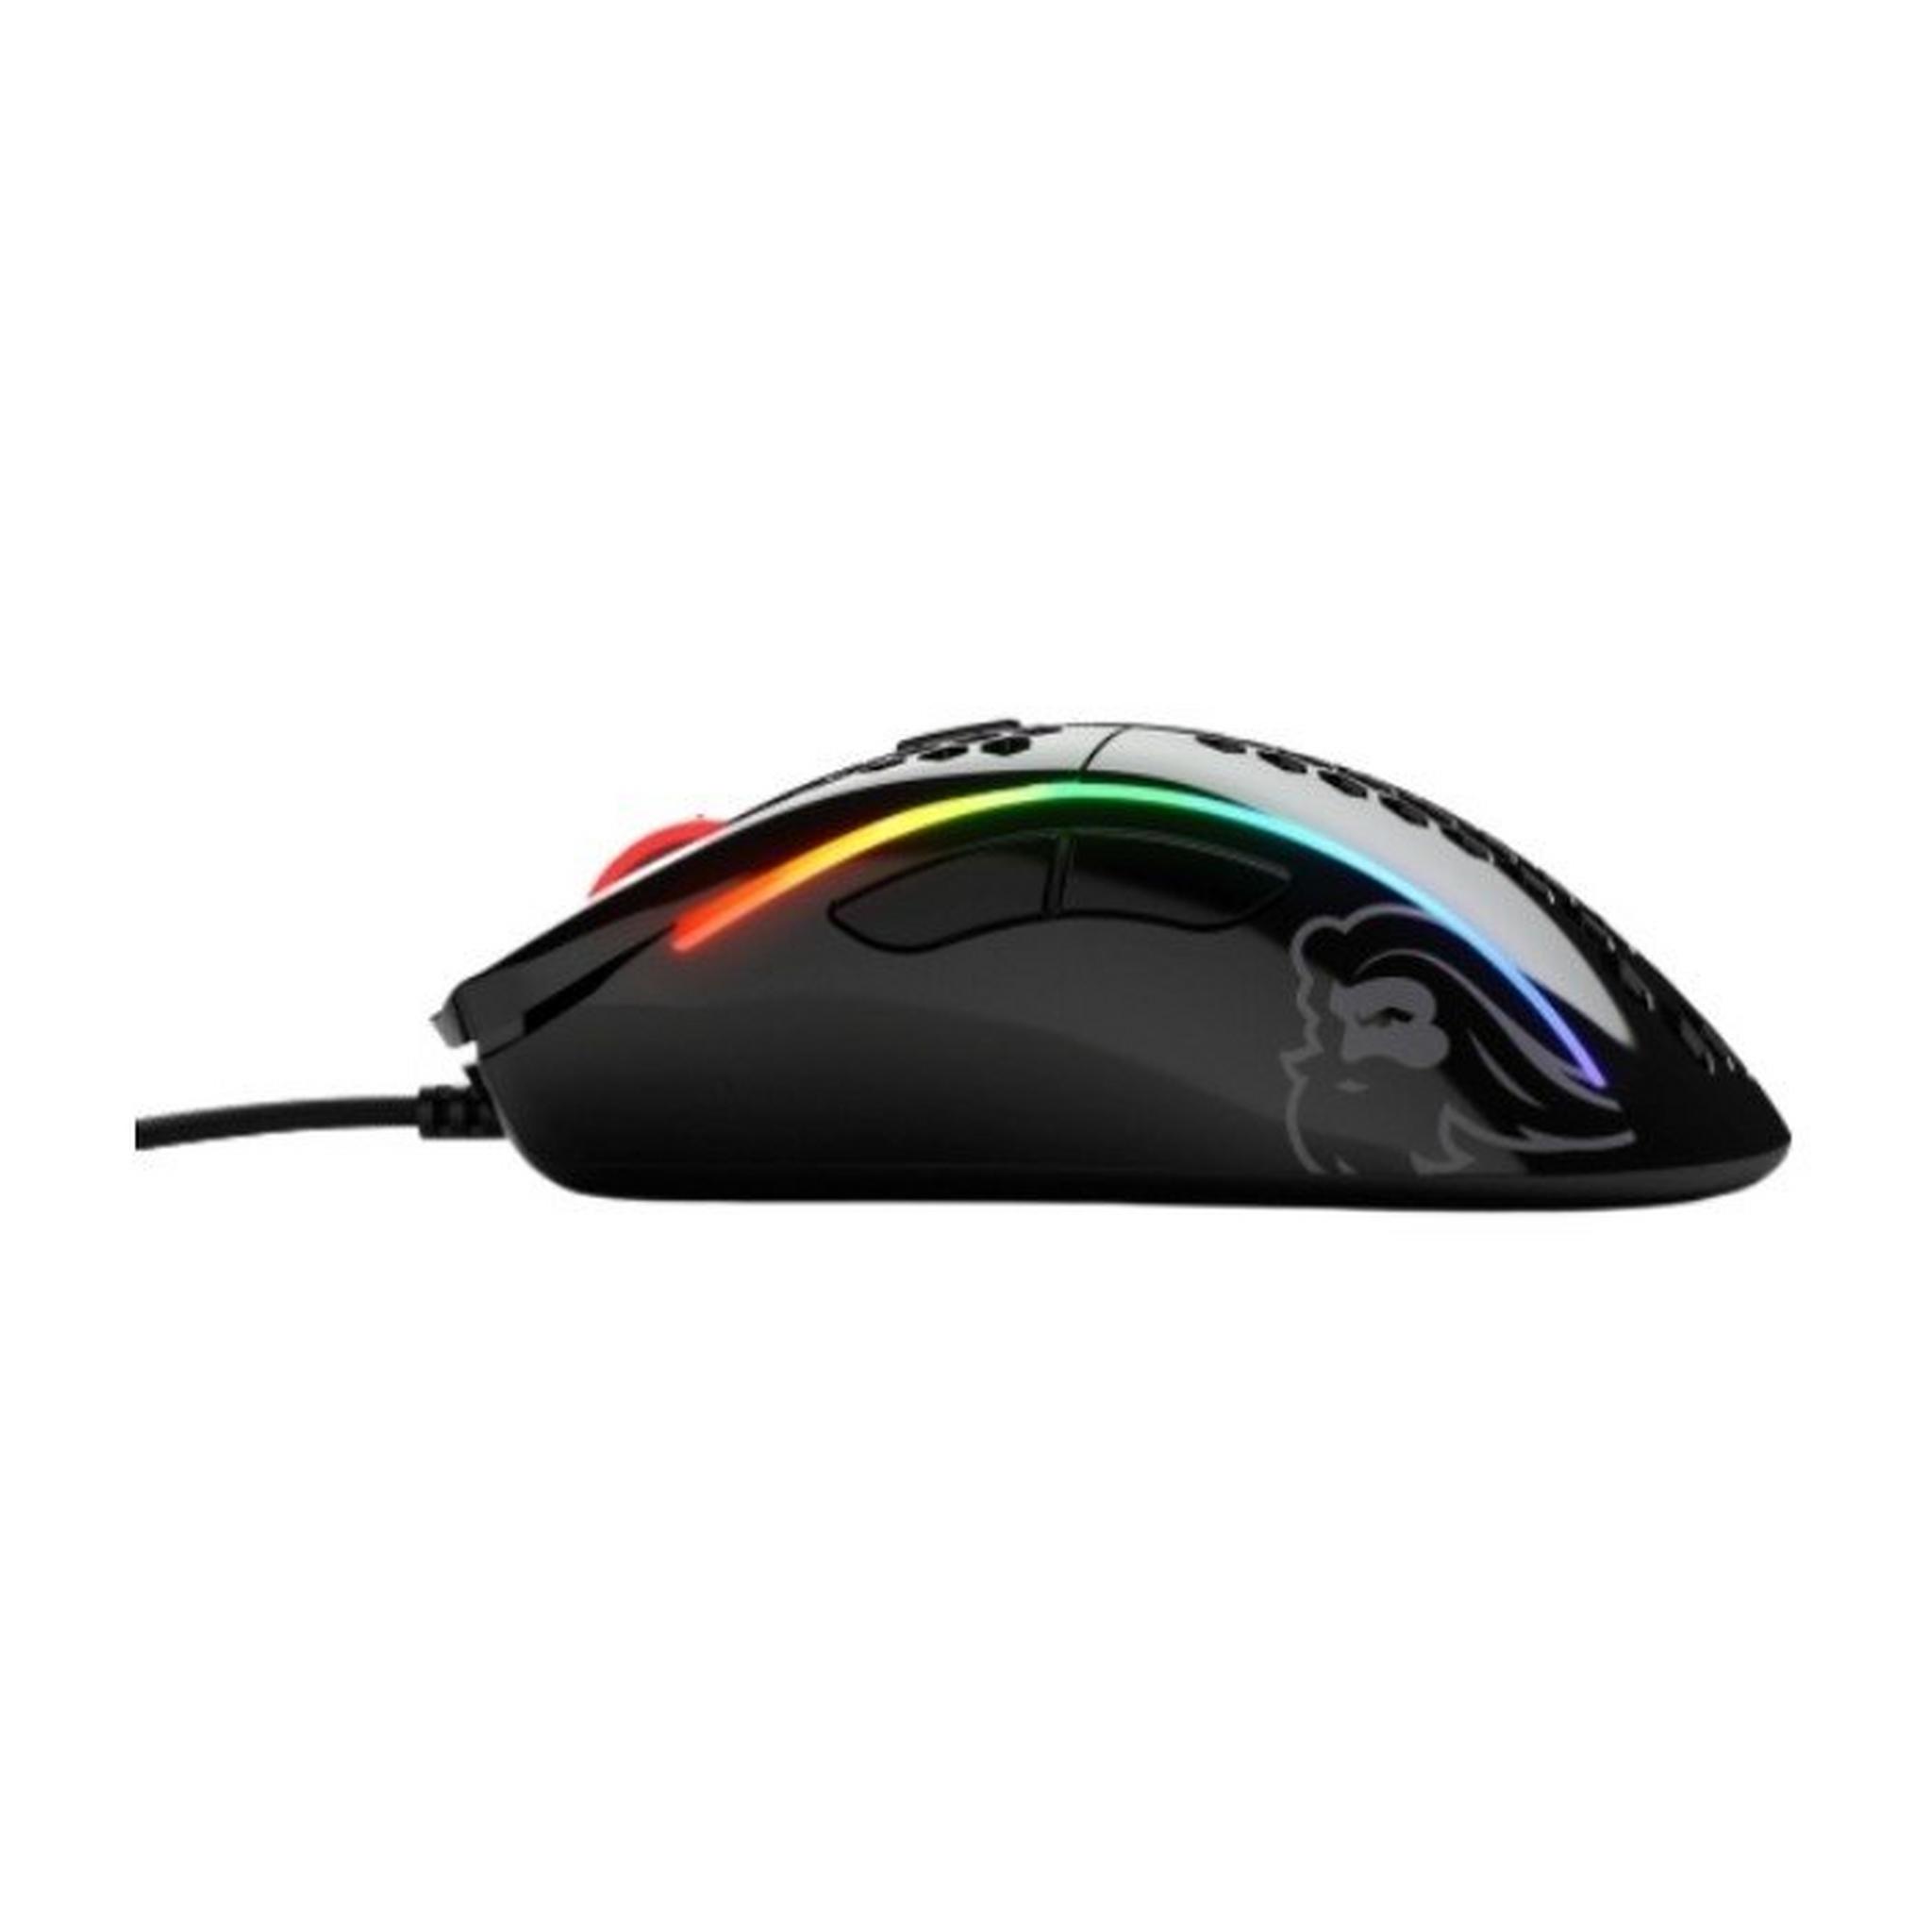 Glorious Model D Minus Gaming Mouse - Glossy Black